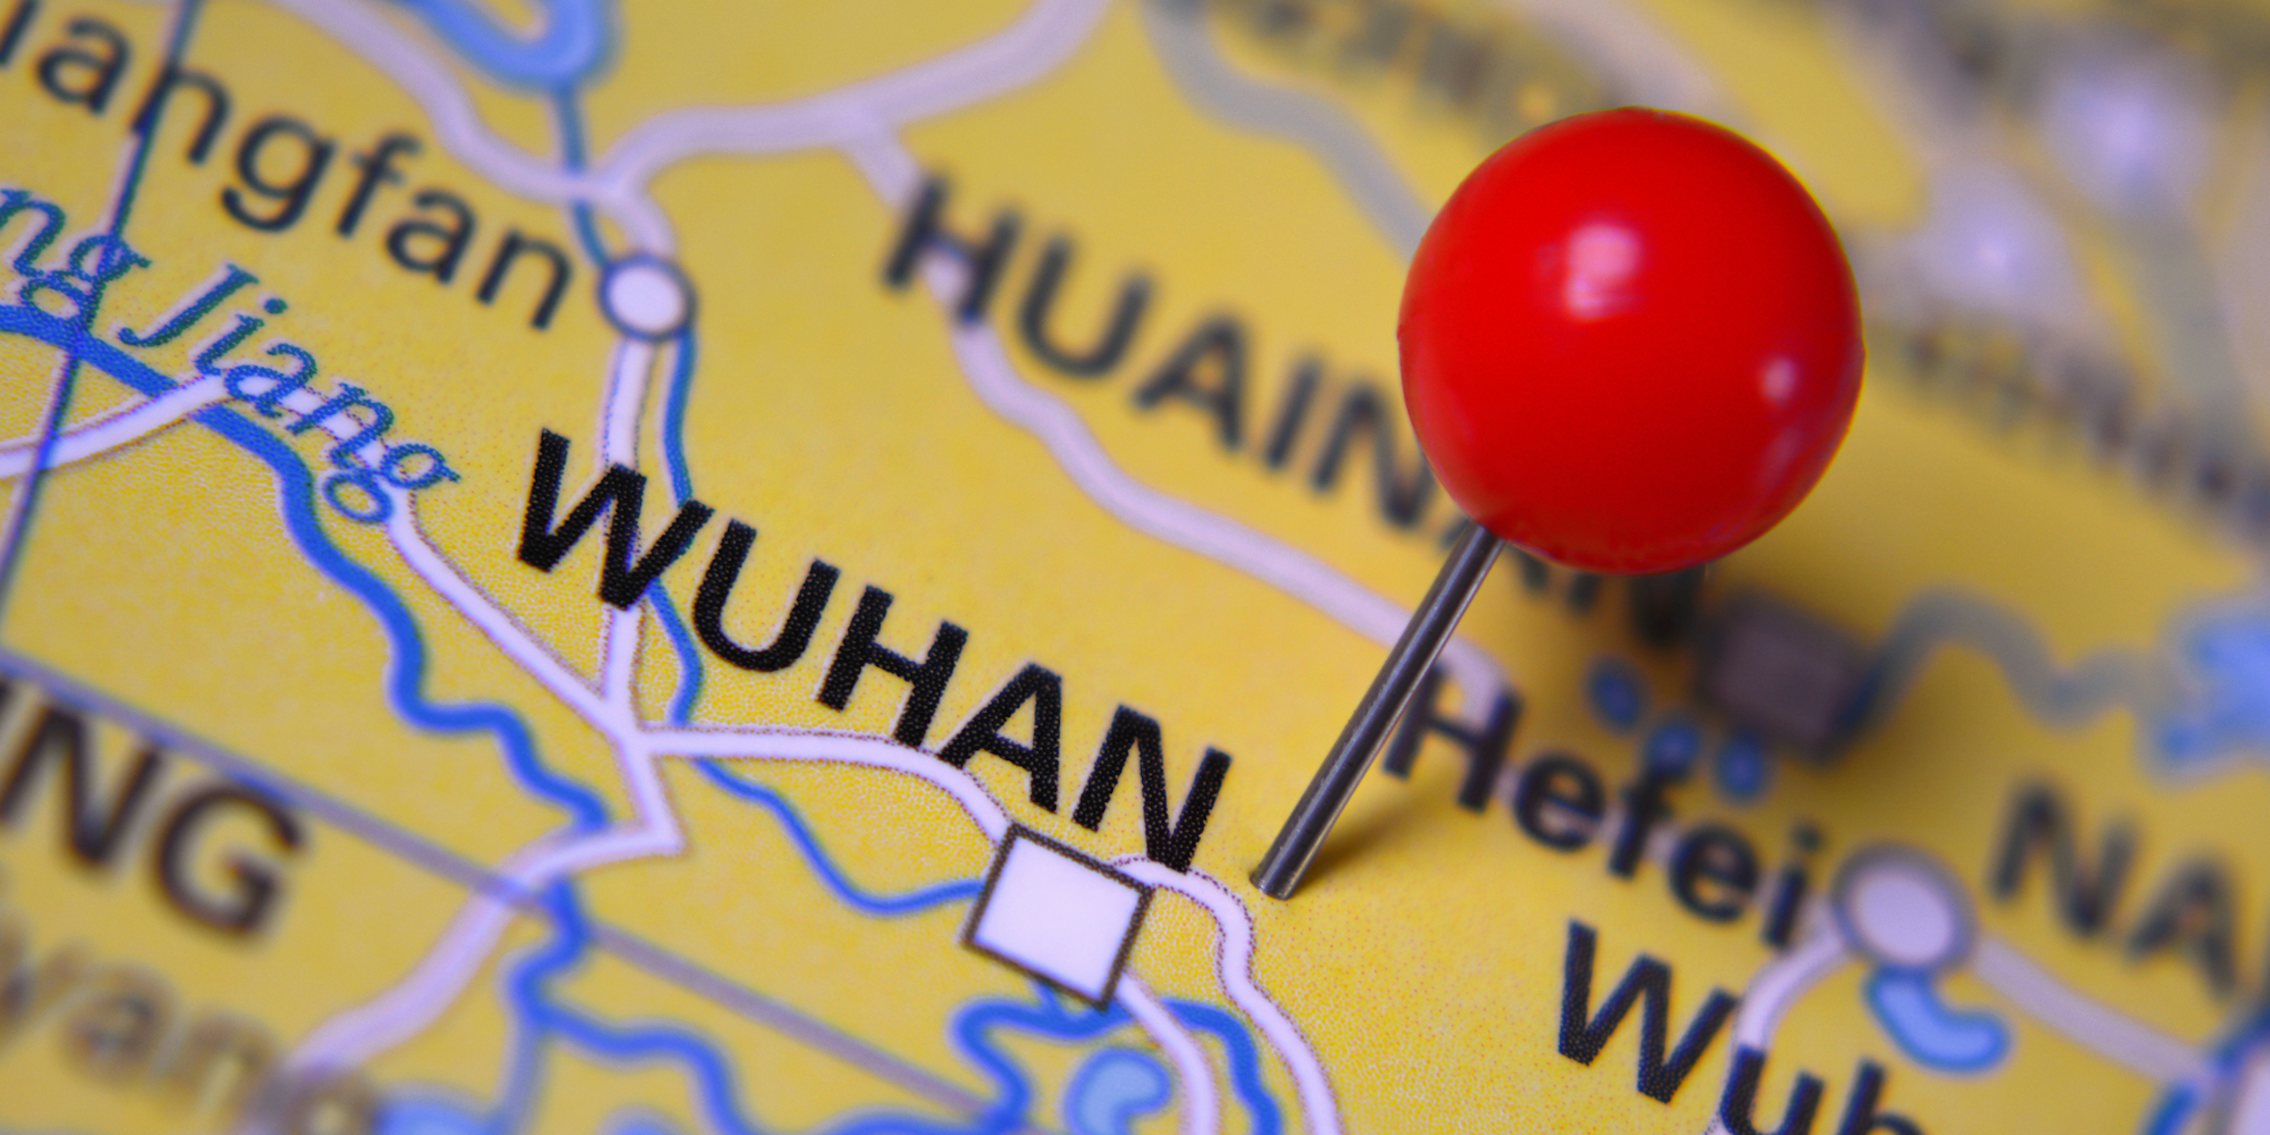 Wuhan marked on a map with red pin